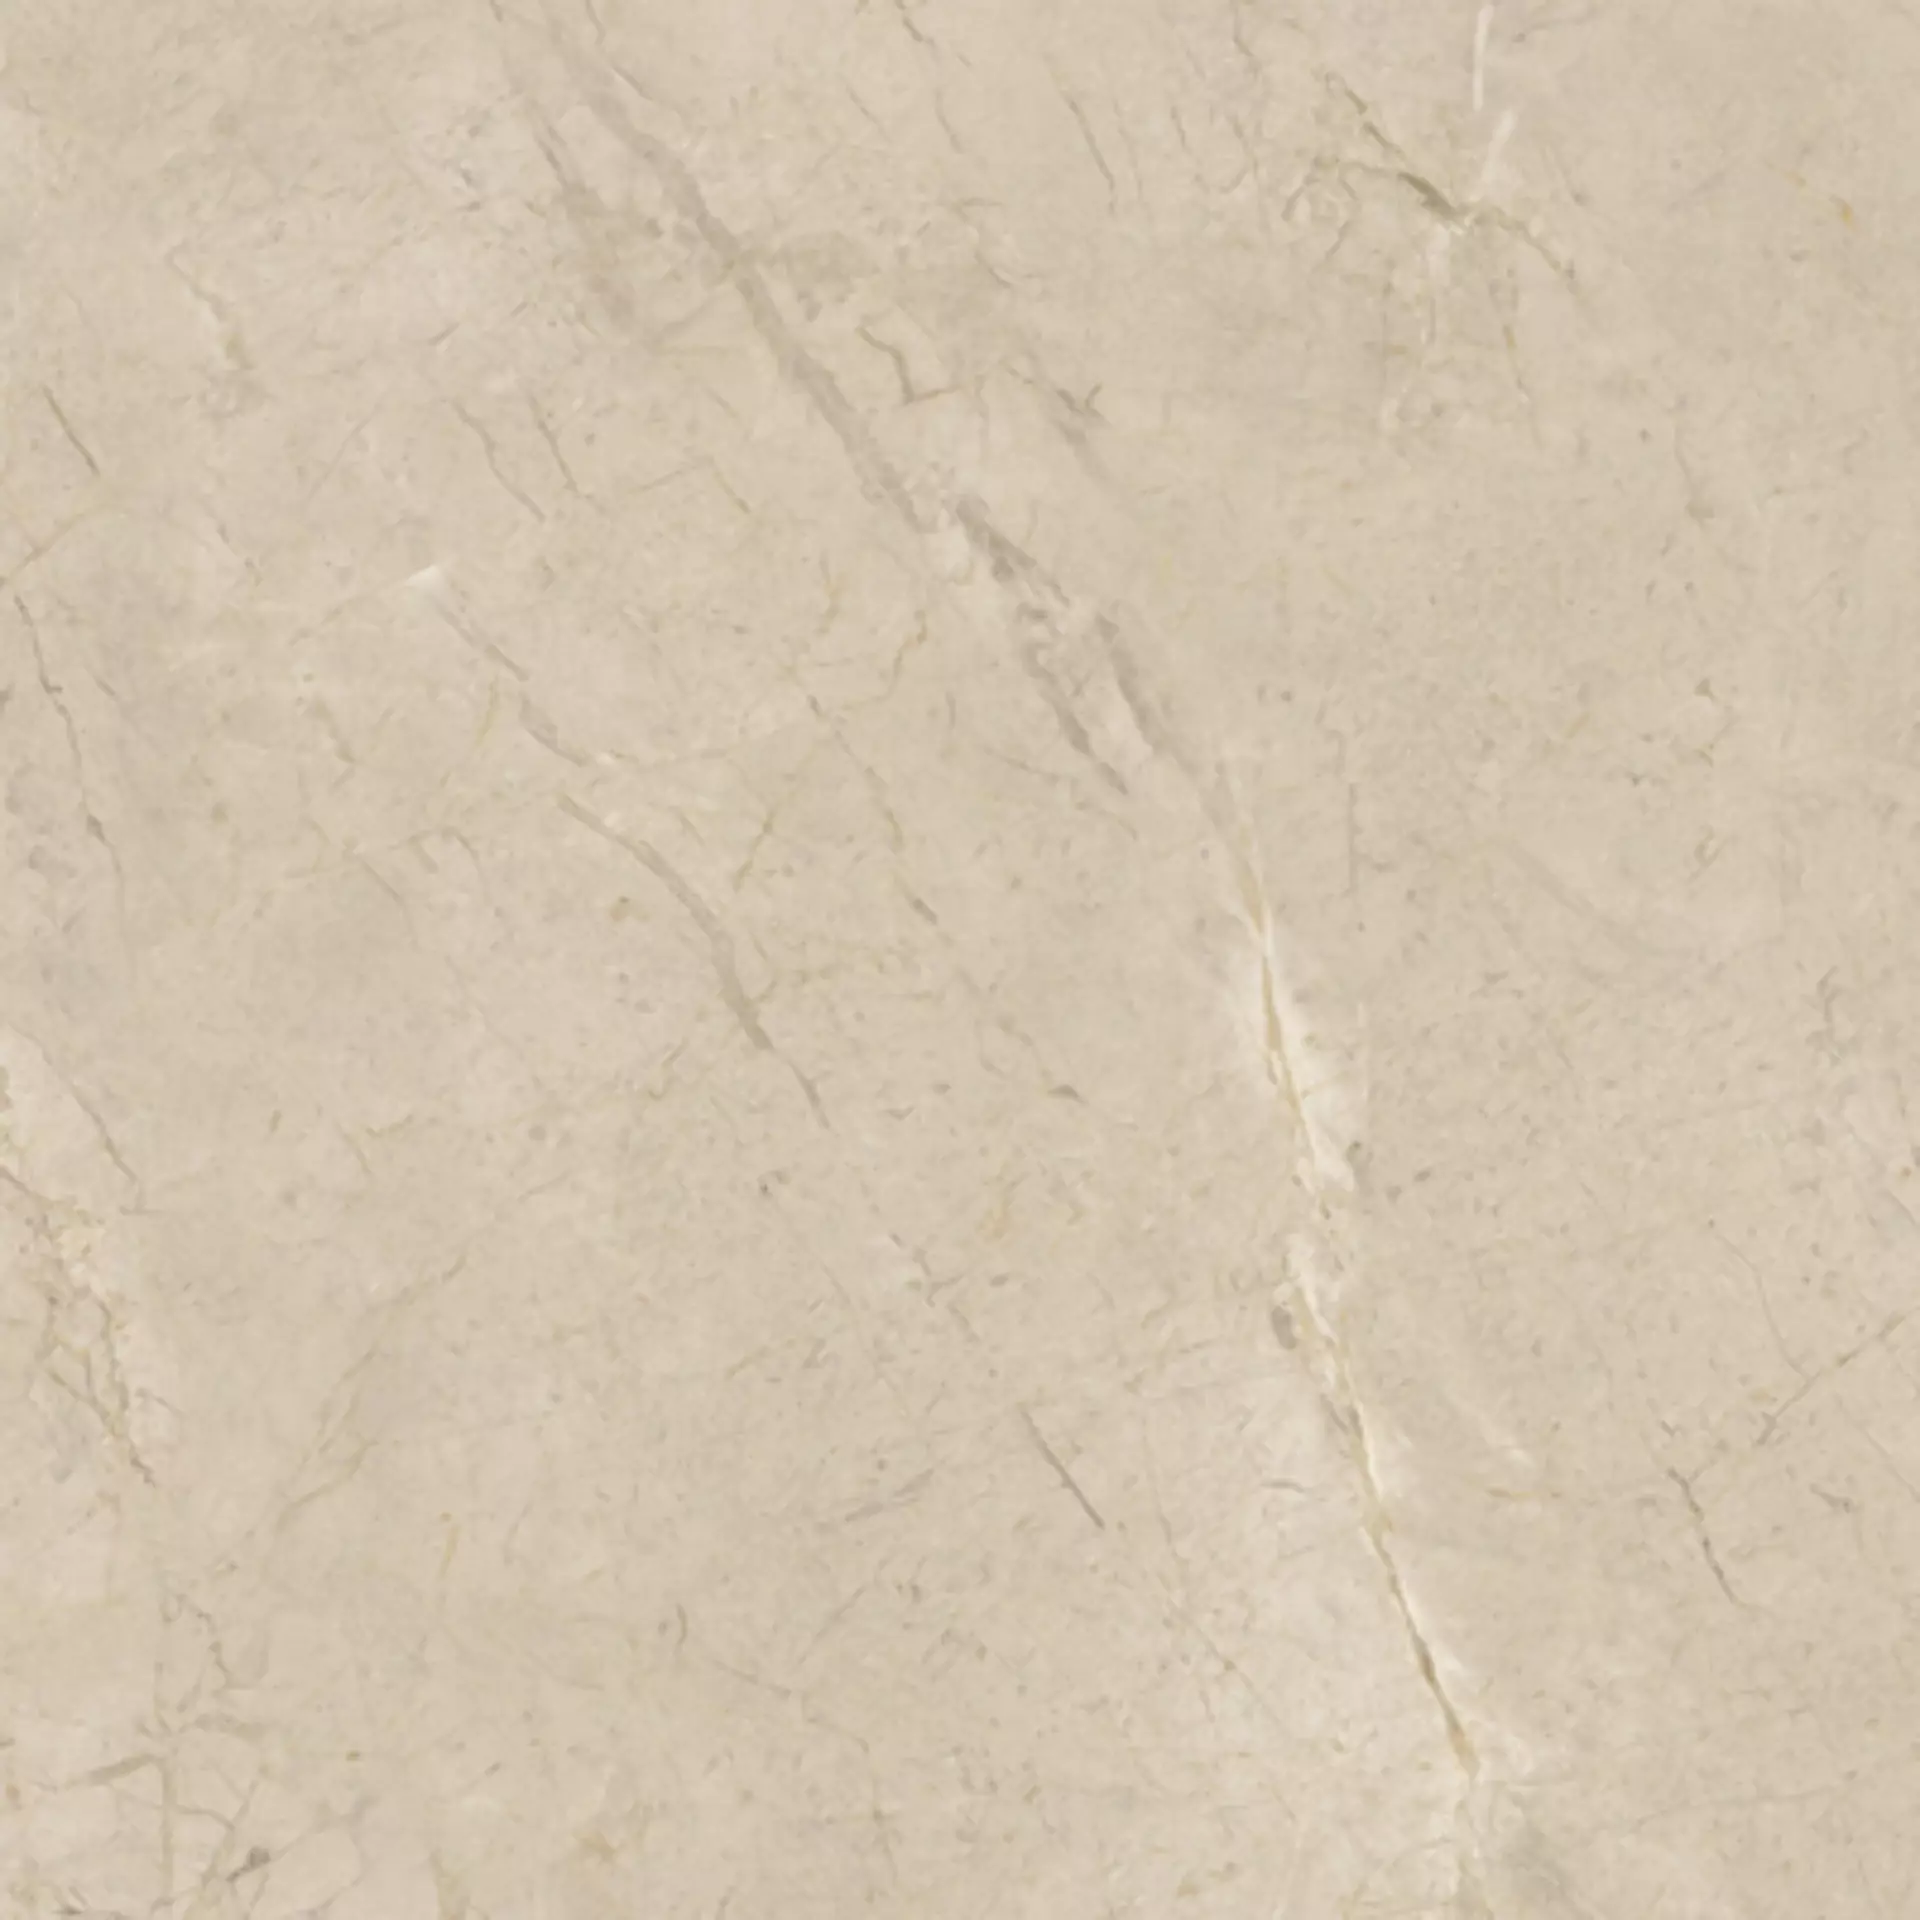 Keope Elements Lux Crema Beige Lappato 32413633 60x60cm rectified 9mm